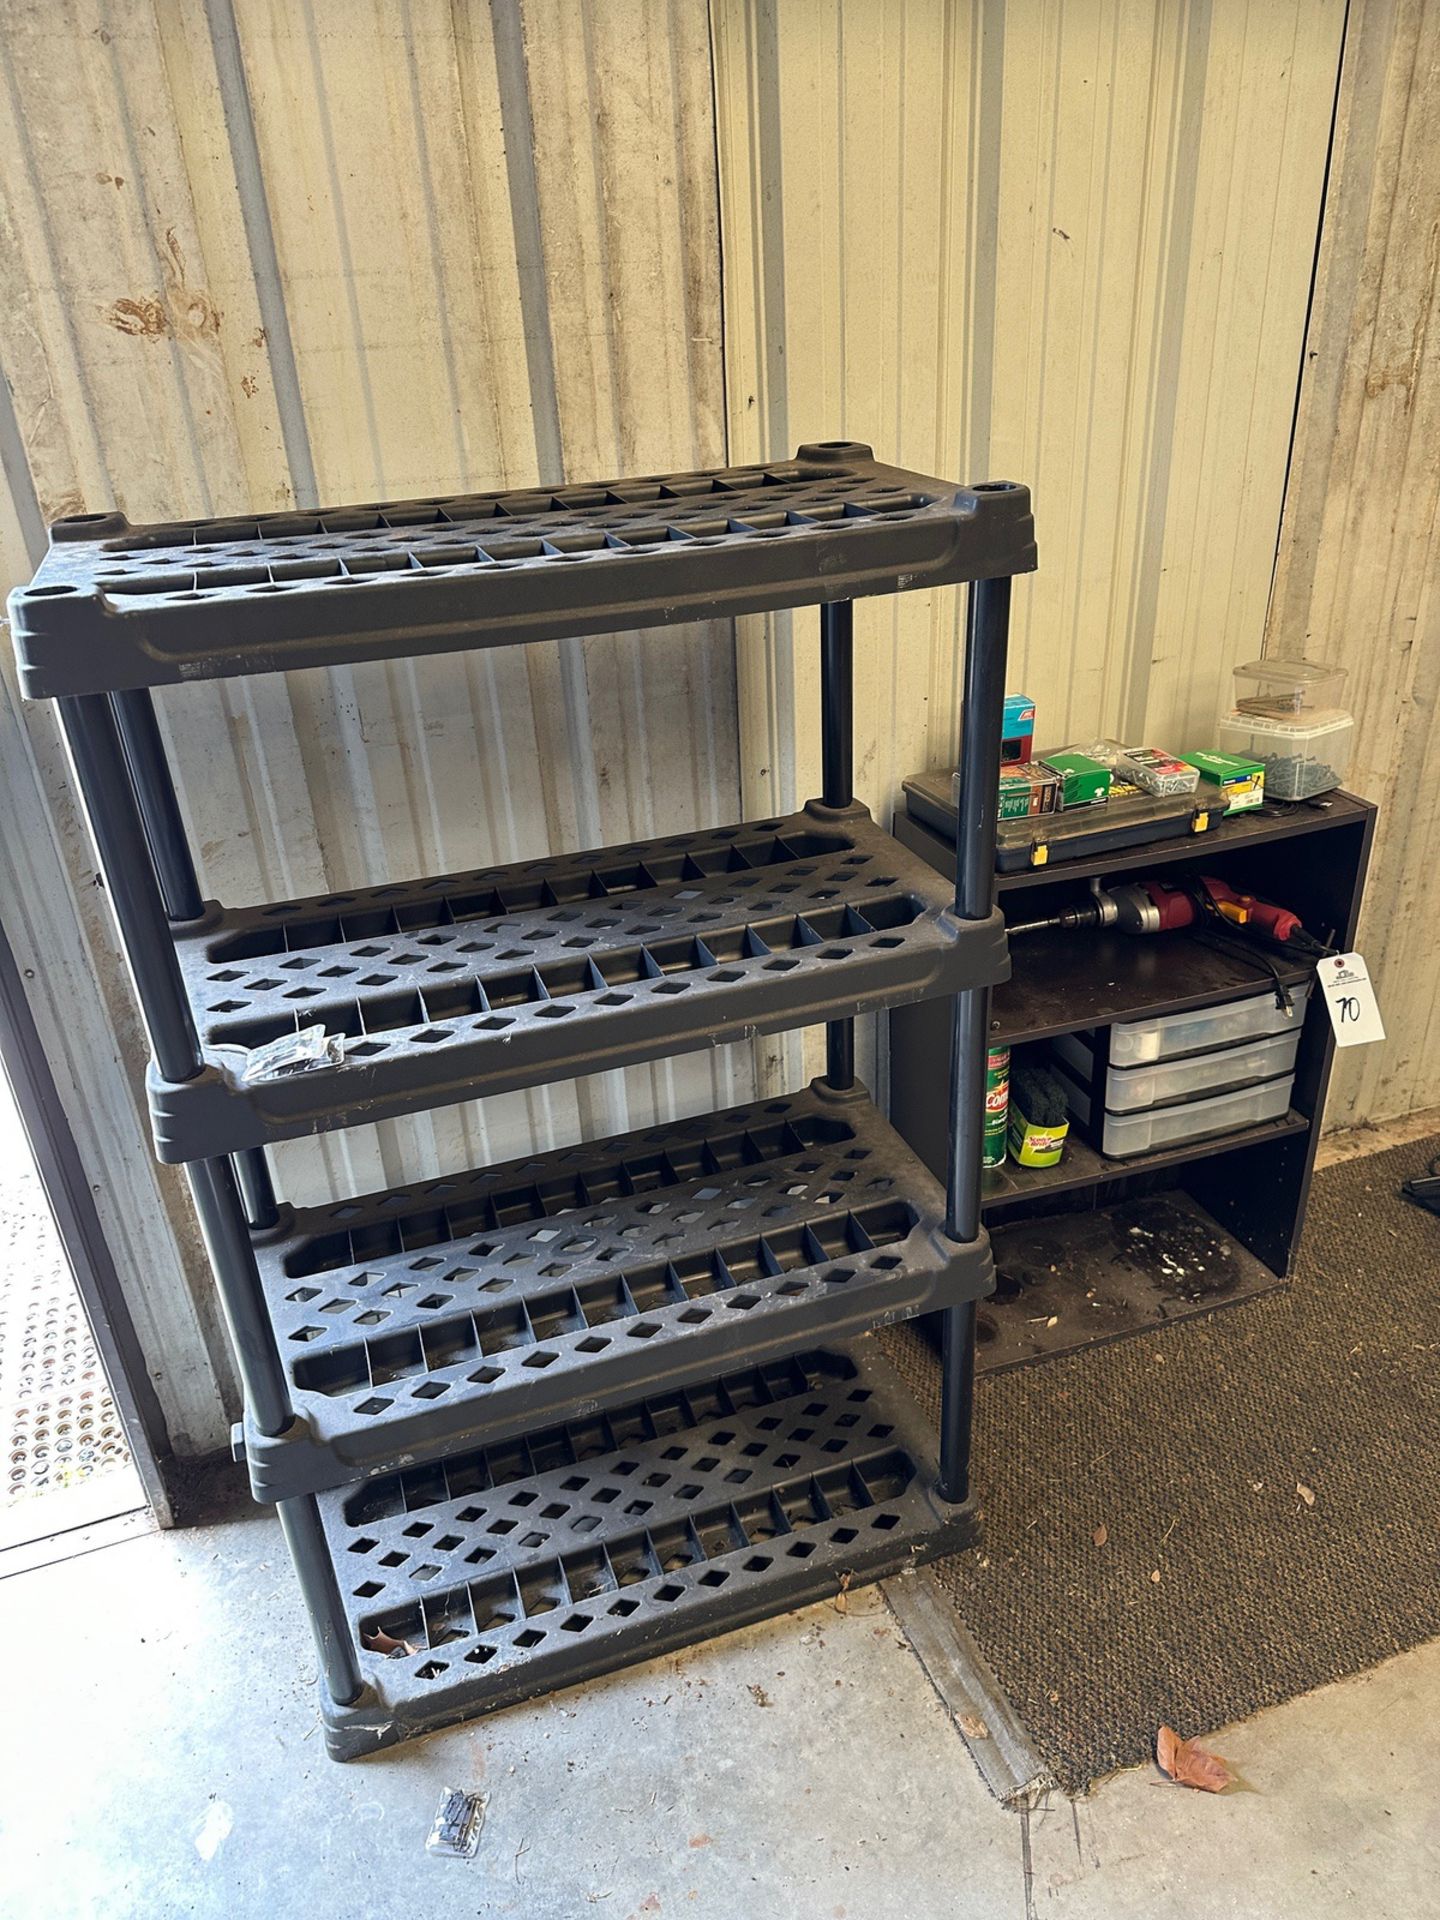 Lot of Shelving Units with Chicago Electric Drill and Contents | Rig Fee $100 - Image 3 of 3